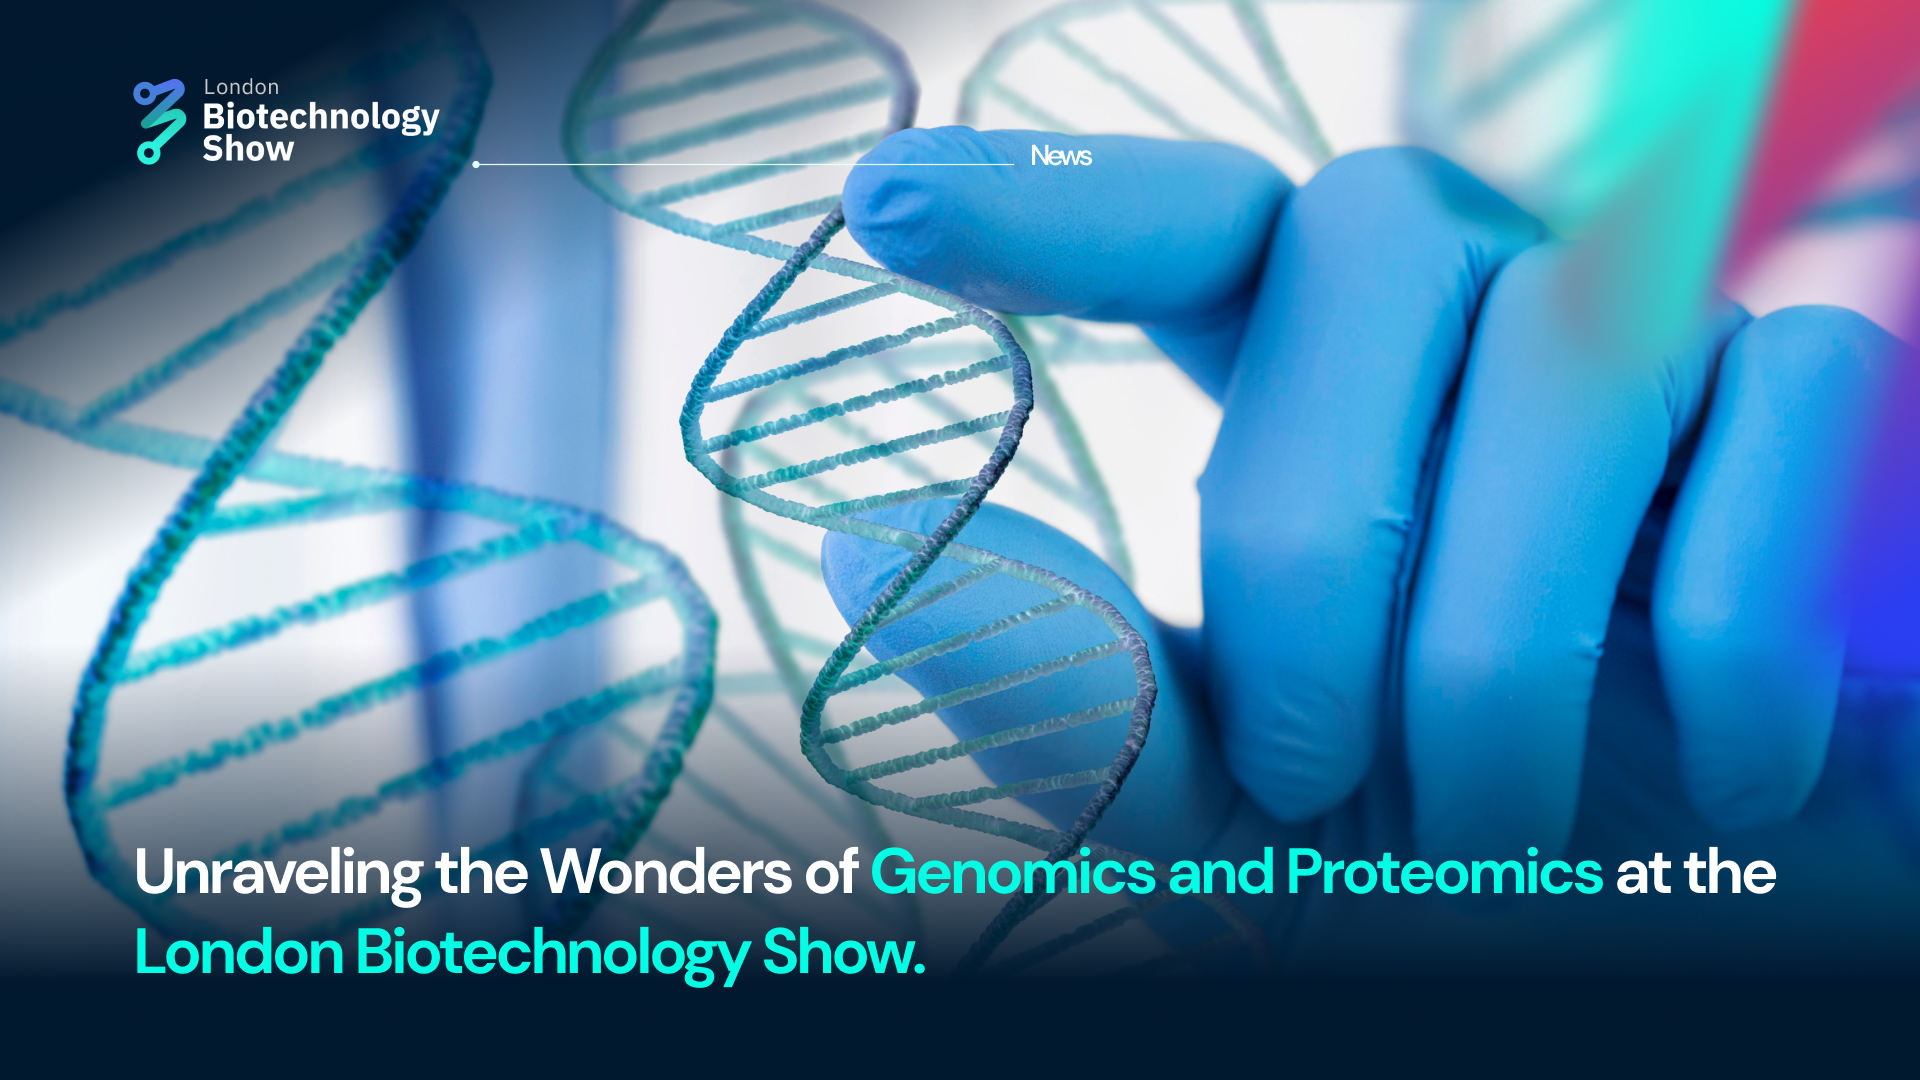 Unraveling the Wonders of Genomics and Proteomics at the London Biotechnology Show.